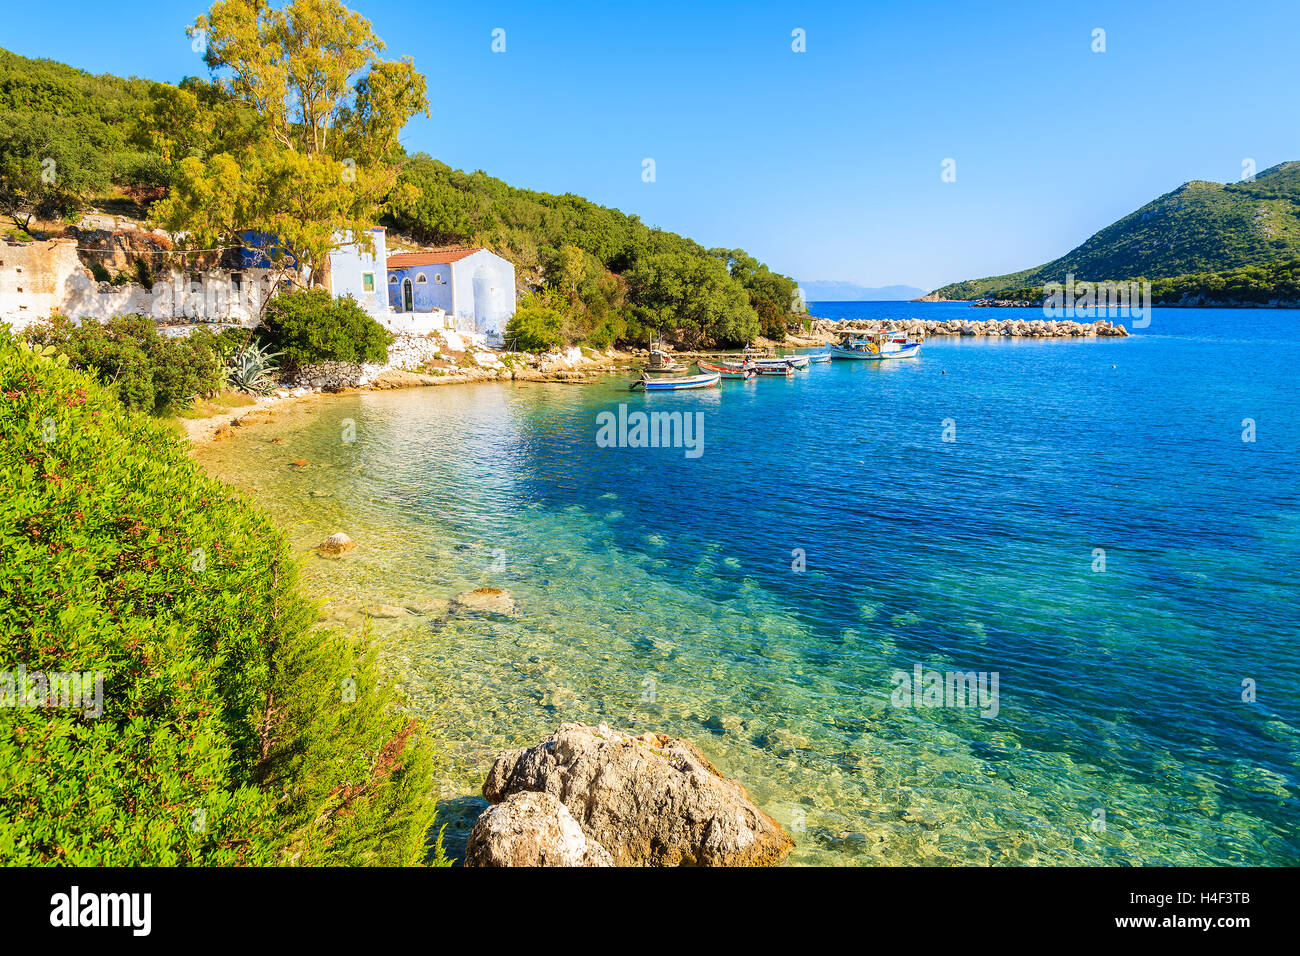 View of bay with old house and fishing boats, Kefalonia island, Greece Stock Photo